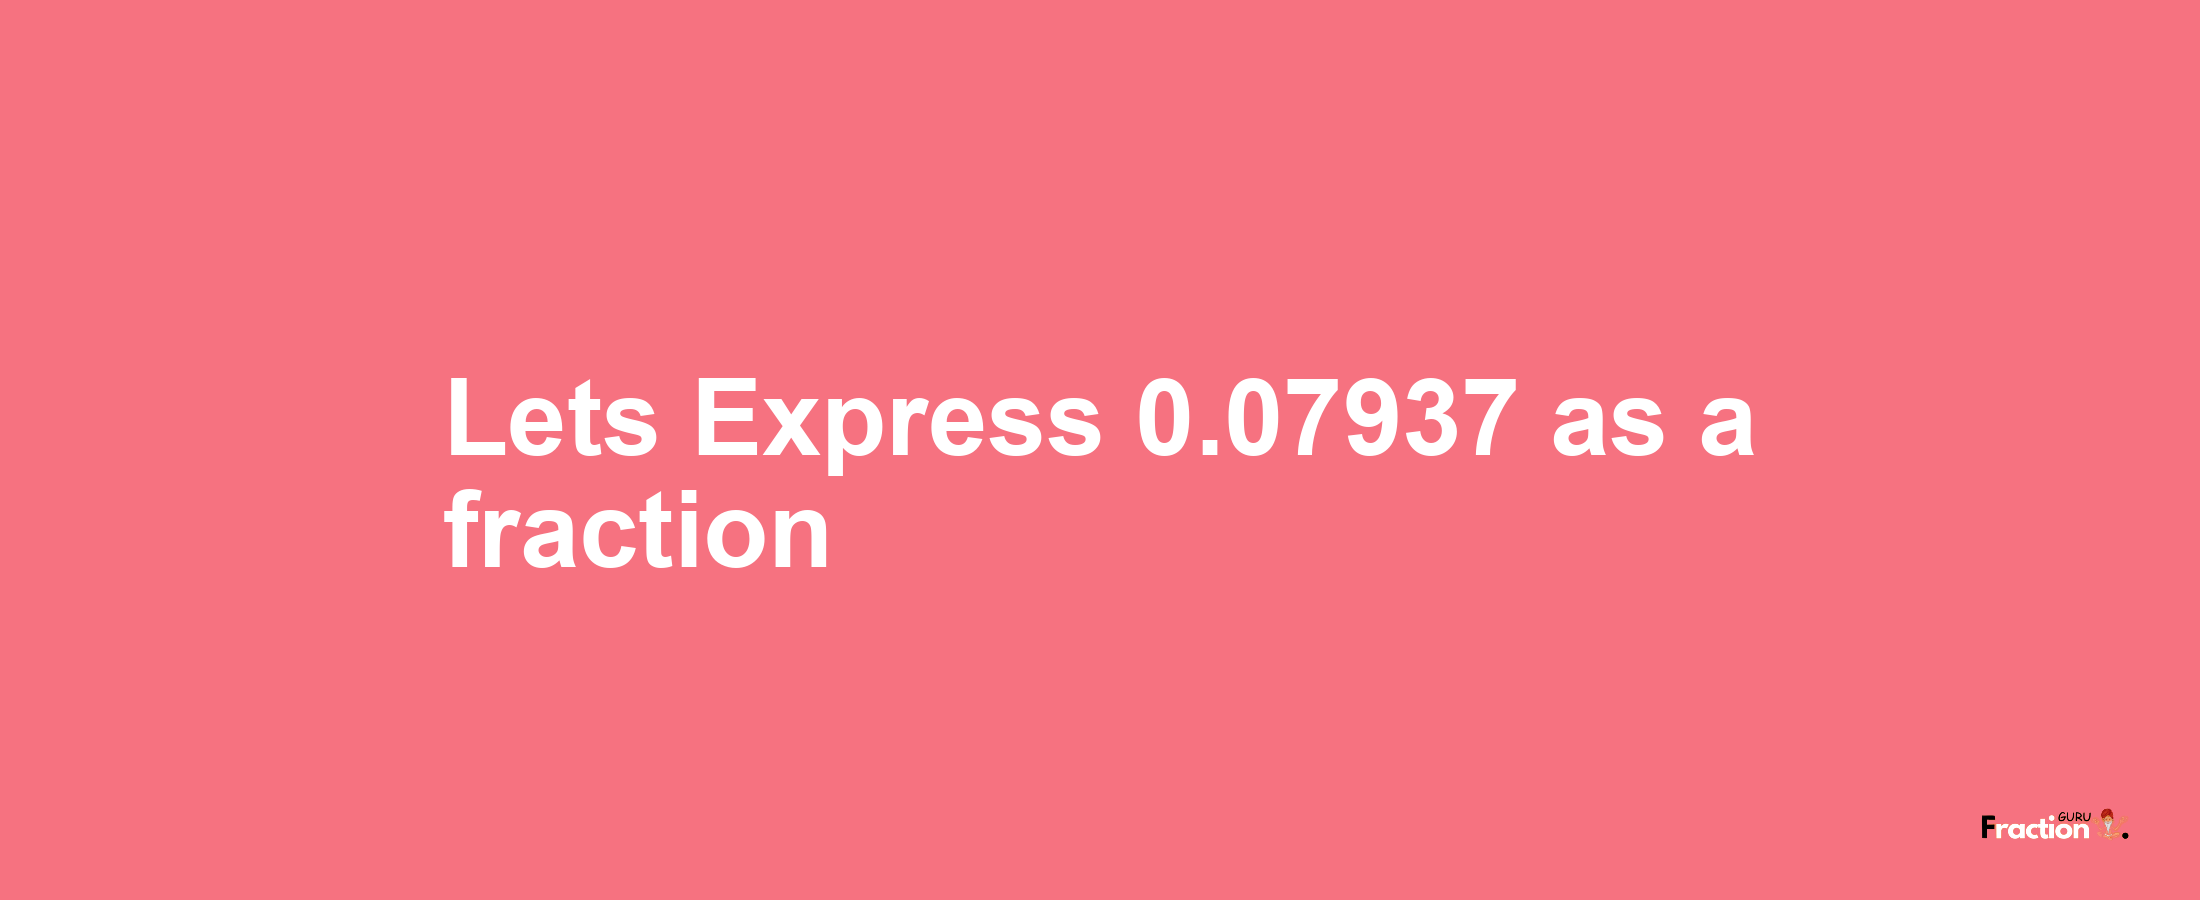 Lets Express 0.07937 as afraction